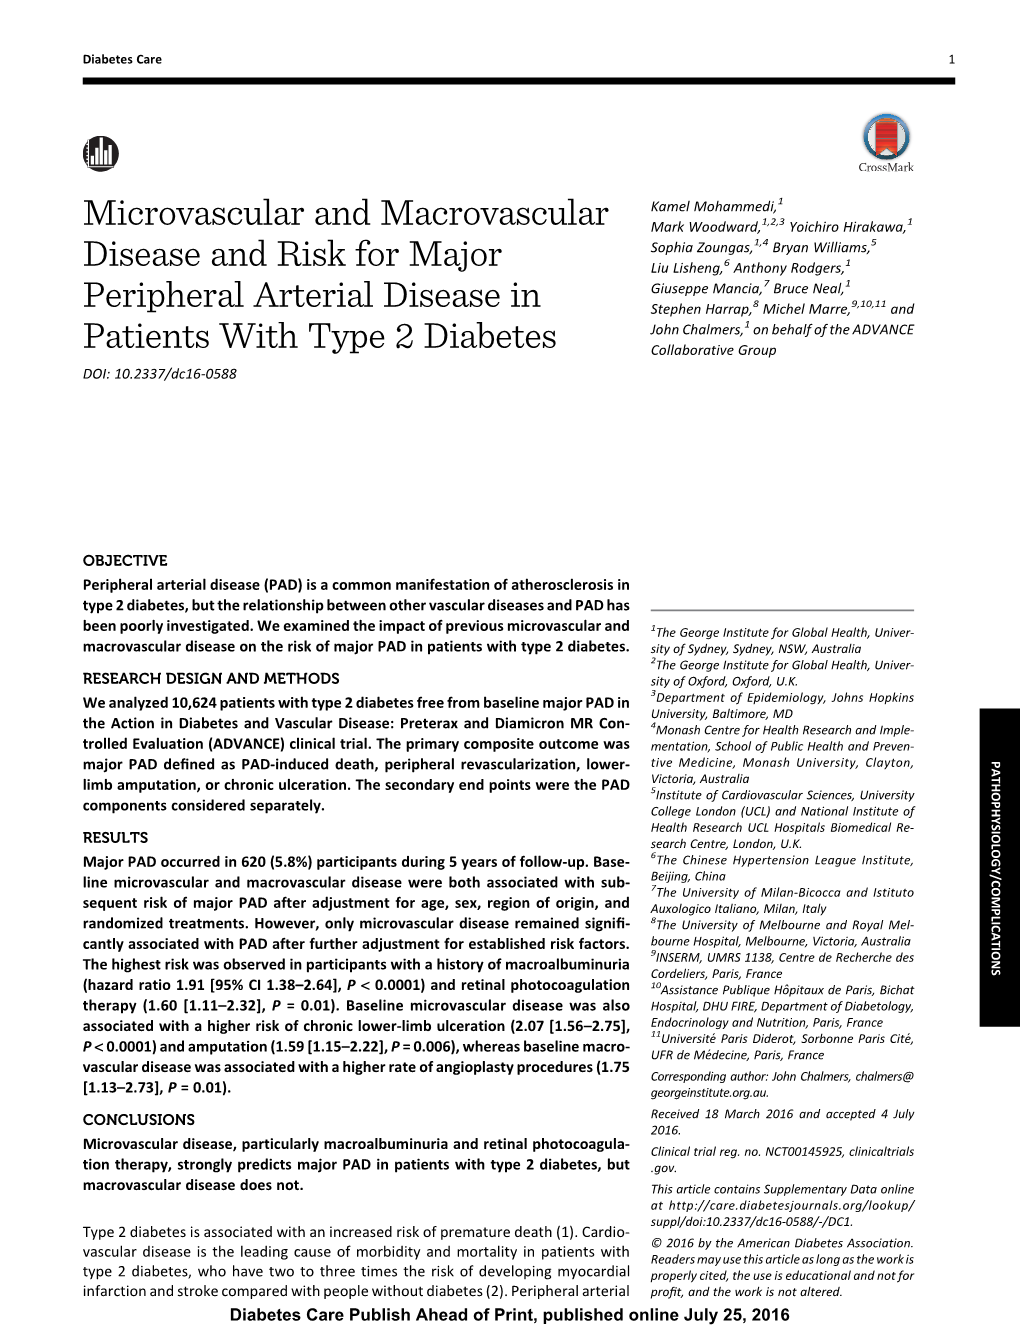 Microvascular and Macrovascular Disease and Risk for Major Peripheral Arterial Disease in Patients with Type 2 Diabetes